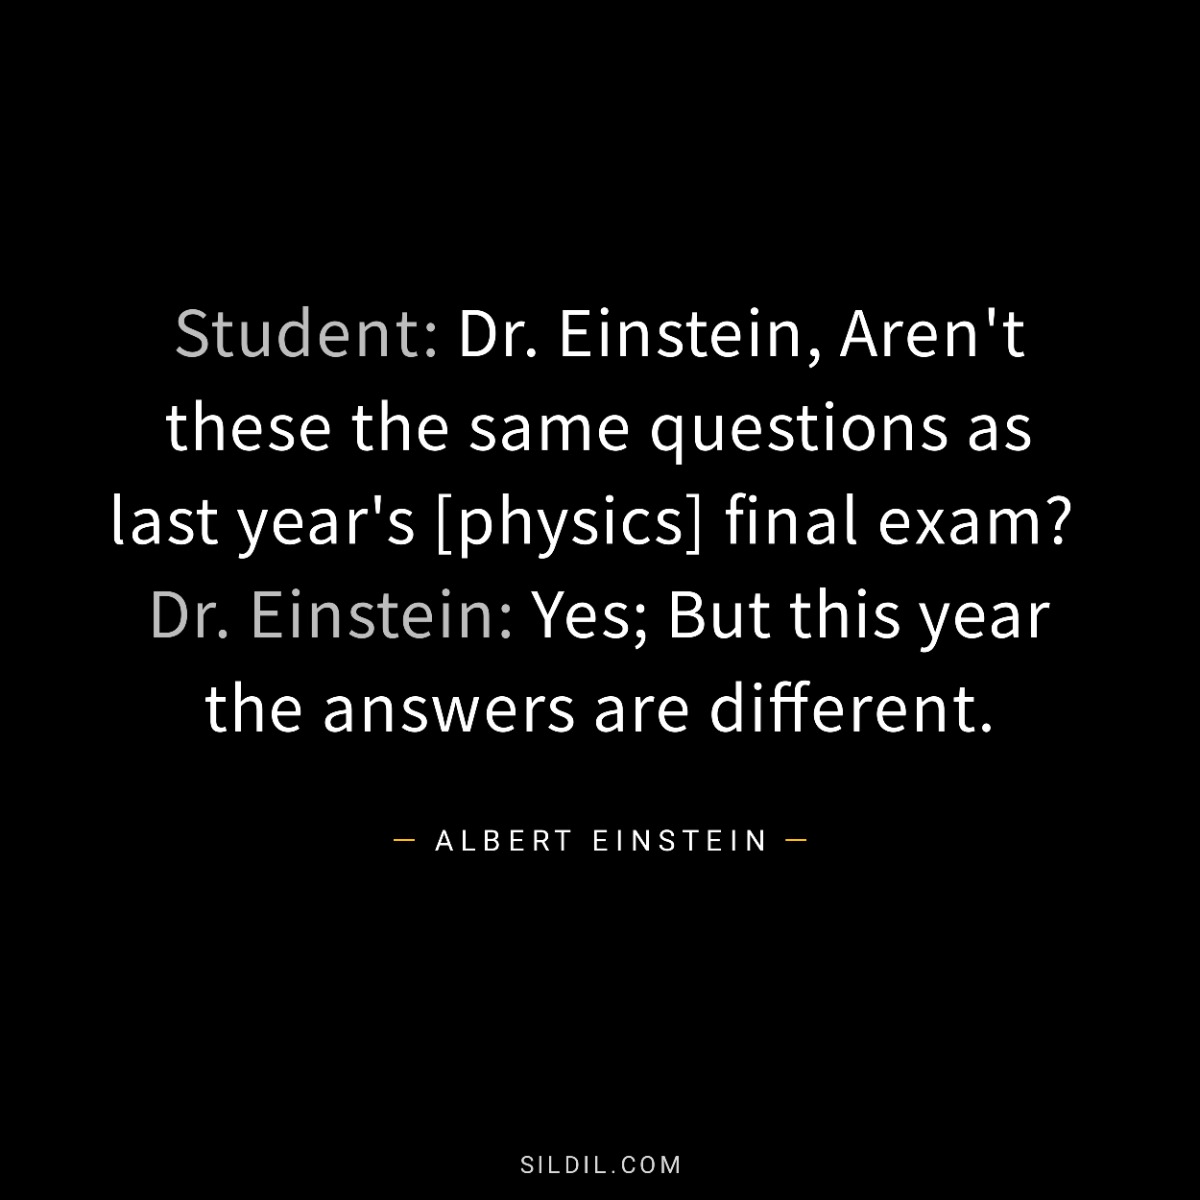 Student: Dr. Einstein, Aren't these the same questions as last year's [physics] final exam?  Dr. Einstein: Yes; But this year the answers are different.